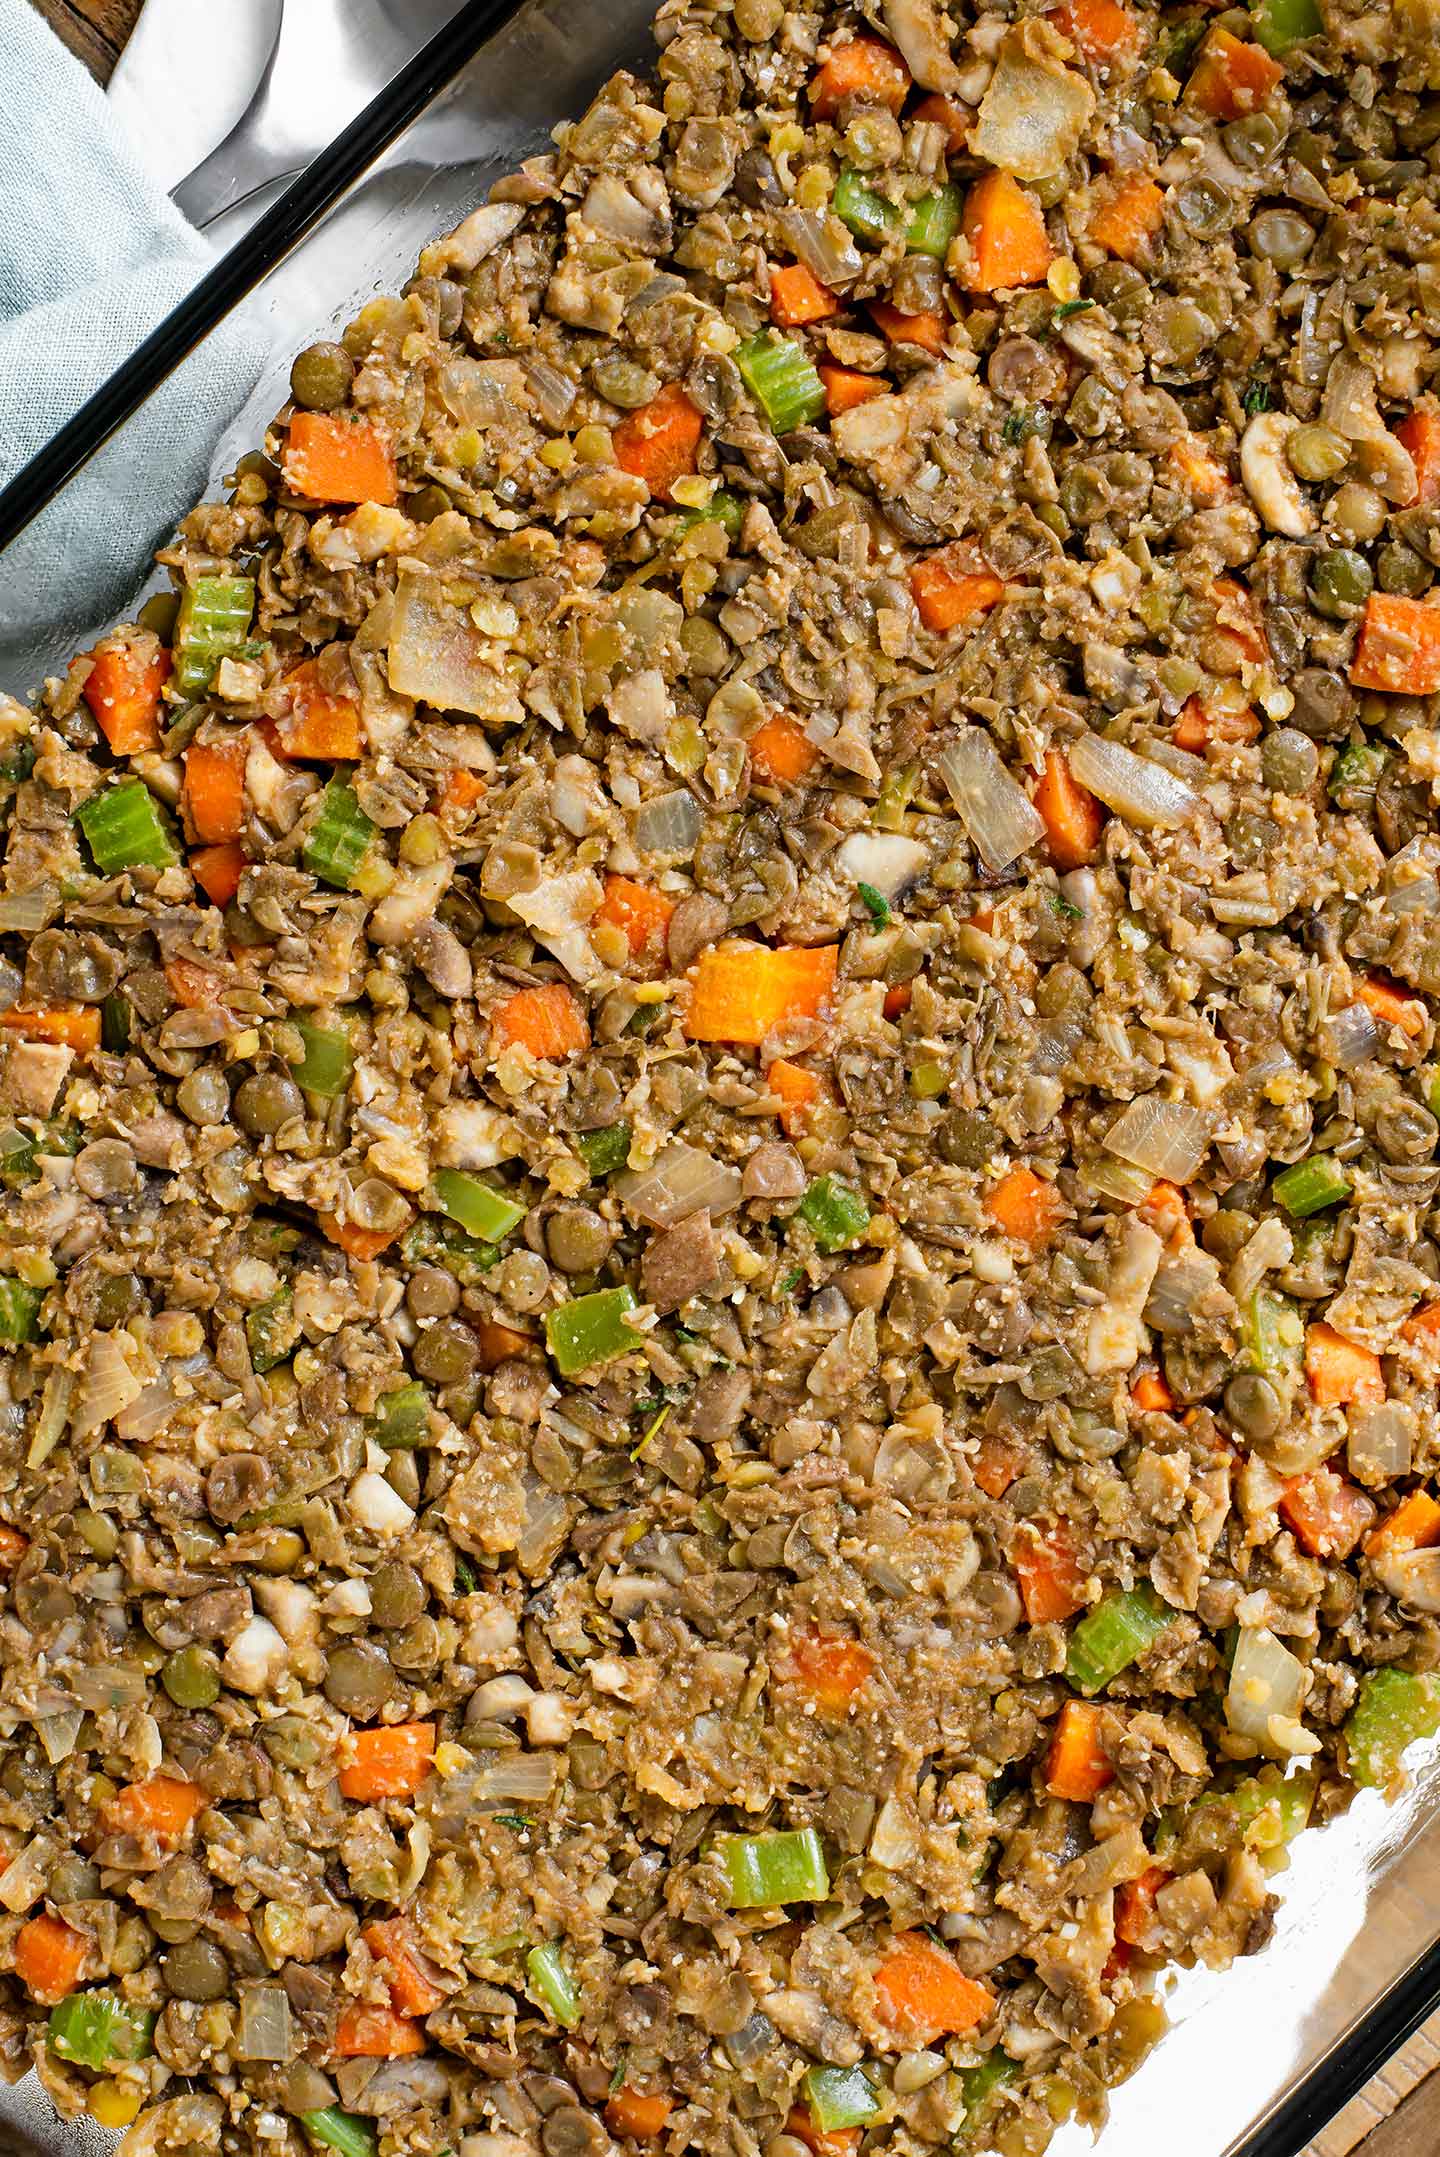 Top down view of the base of the pie in a glass serving dish. Lentils, celery, carrots, and mushrooms are held together with seasonings and almond flour.